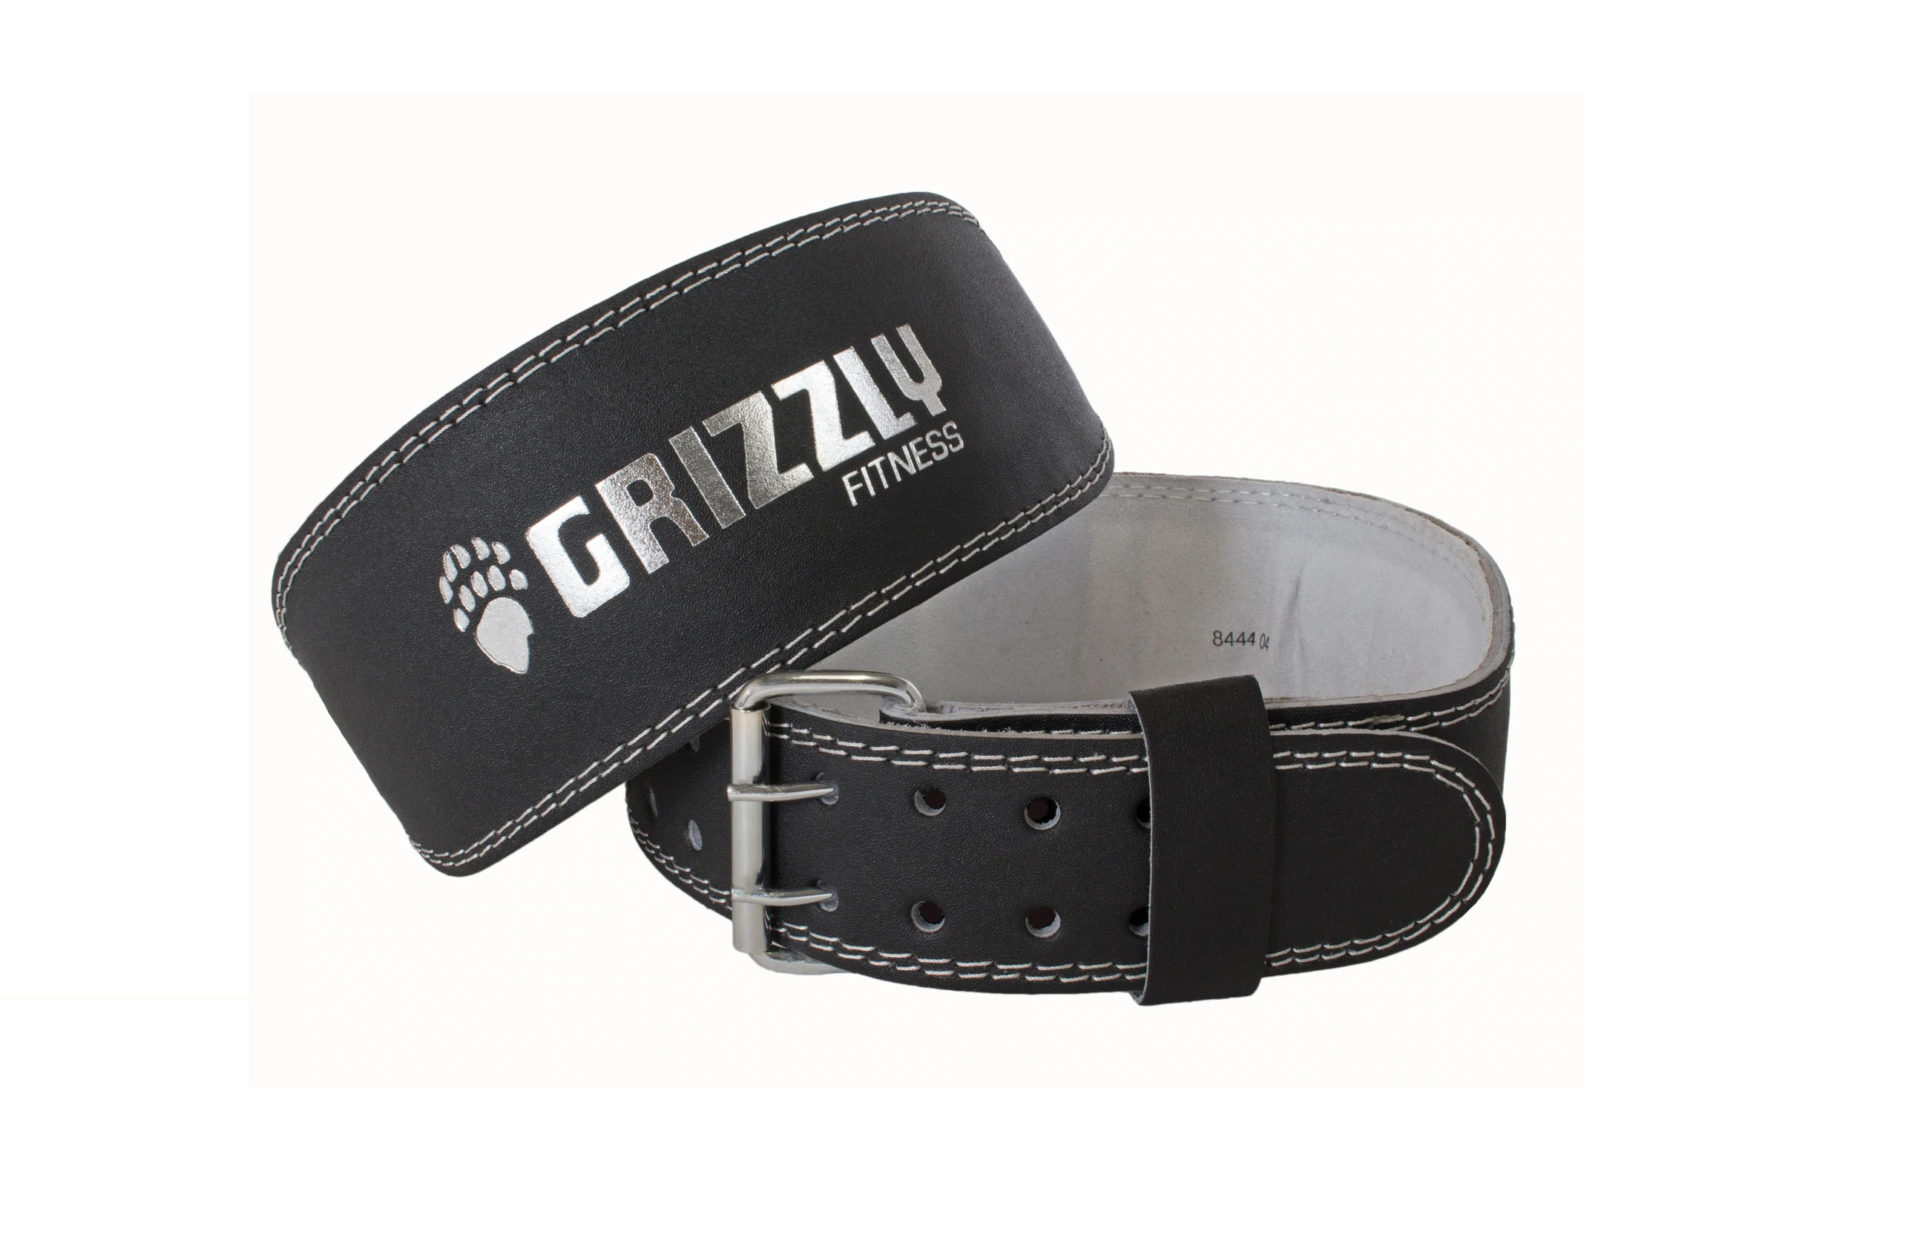 Grizzly Leather Lifting Belts - Niagara and Hamilton Fitness Solutions